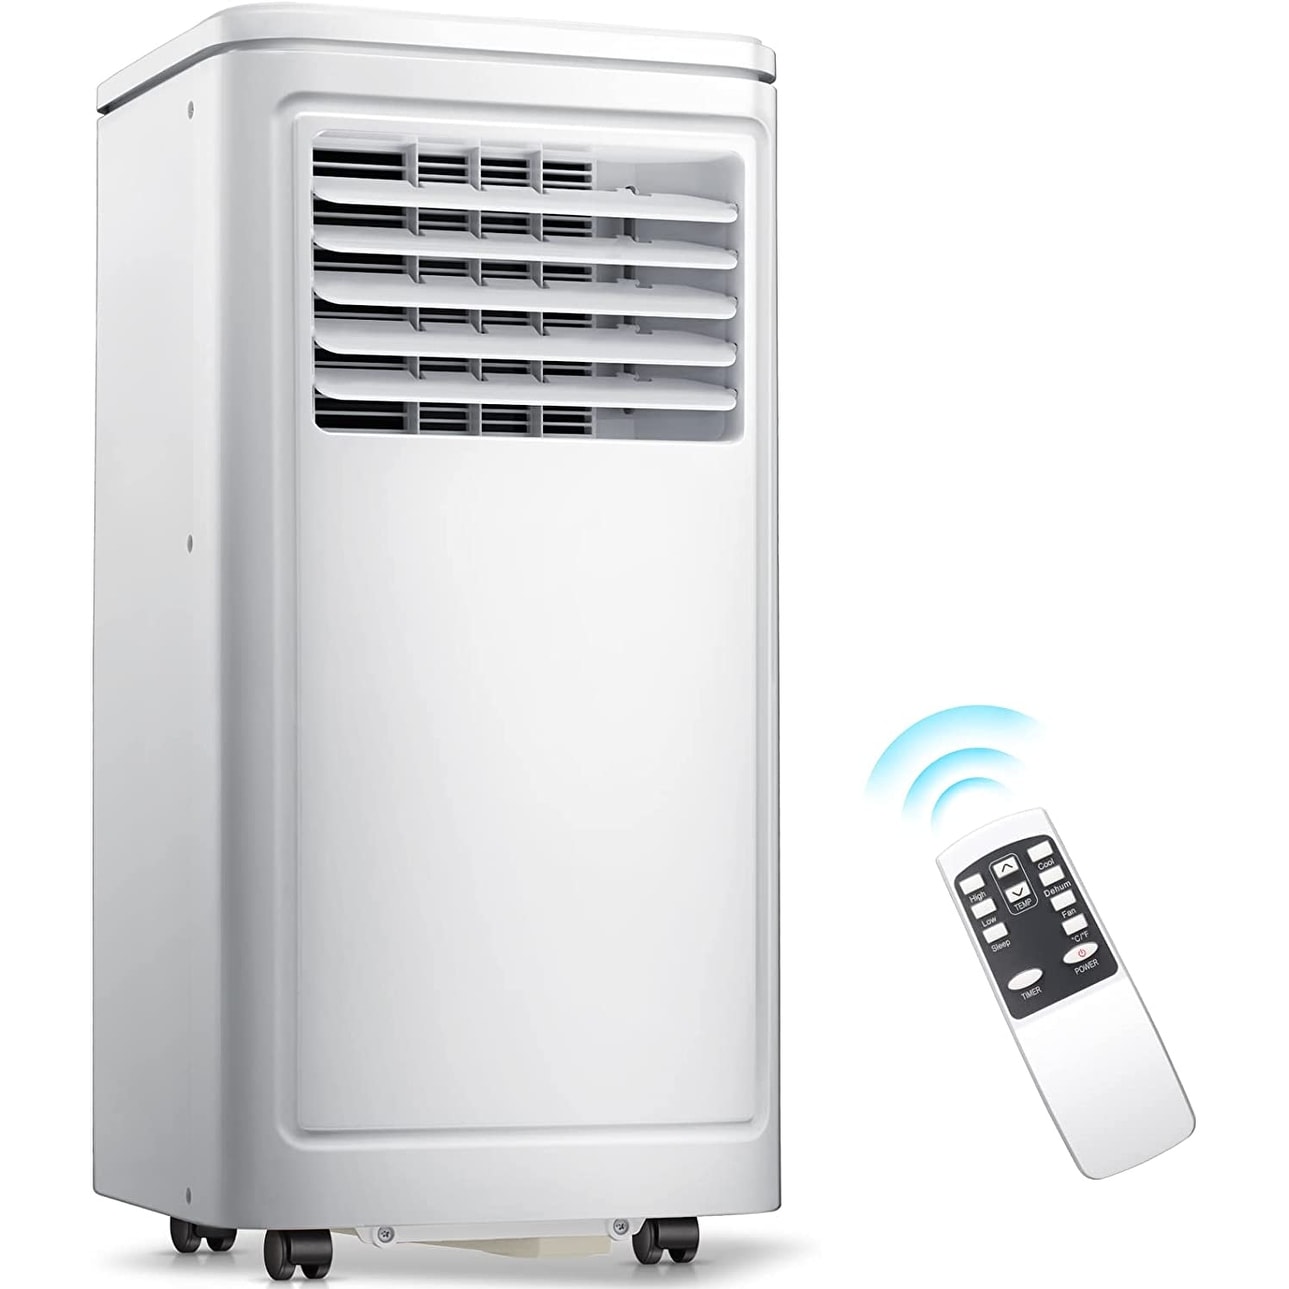 https://ak1.ostkcdn.com/images/products/is/images/direct/12faa9f25aca45e393f56d44767a91d9722ba694/Portable-Air-Conditioner-8500-BTU%2C-Remote-Control%2C-Cools-250sq.-ft%2C-Quiet-Operation%2CWindow-Fan%2C24H-Timer%2C-2-Fan-Speed.jpg